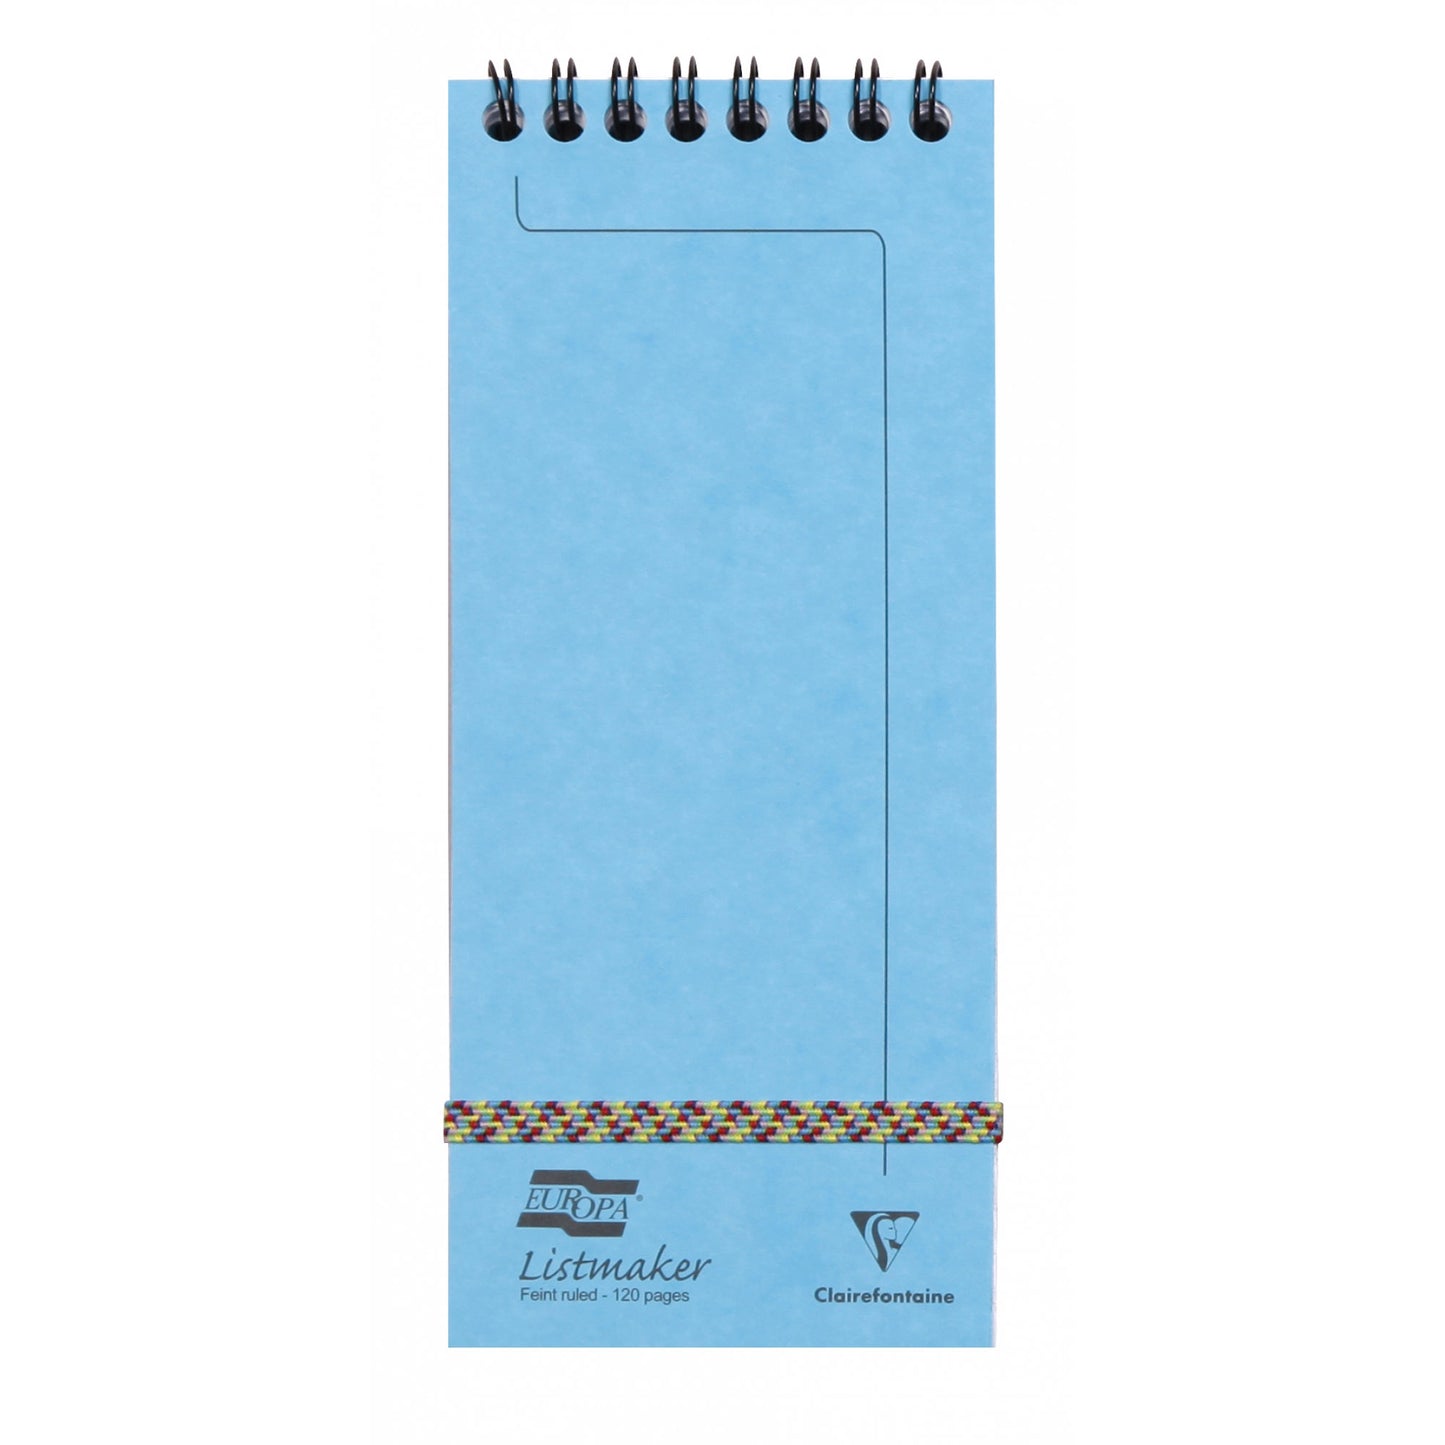 Clairefontaine #482/1111Z Europa Listmaker Lined Notepad (3 x 7) - Turquoise